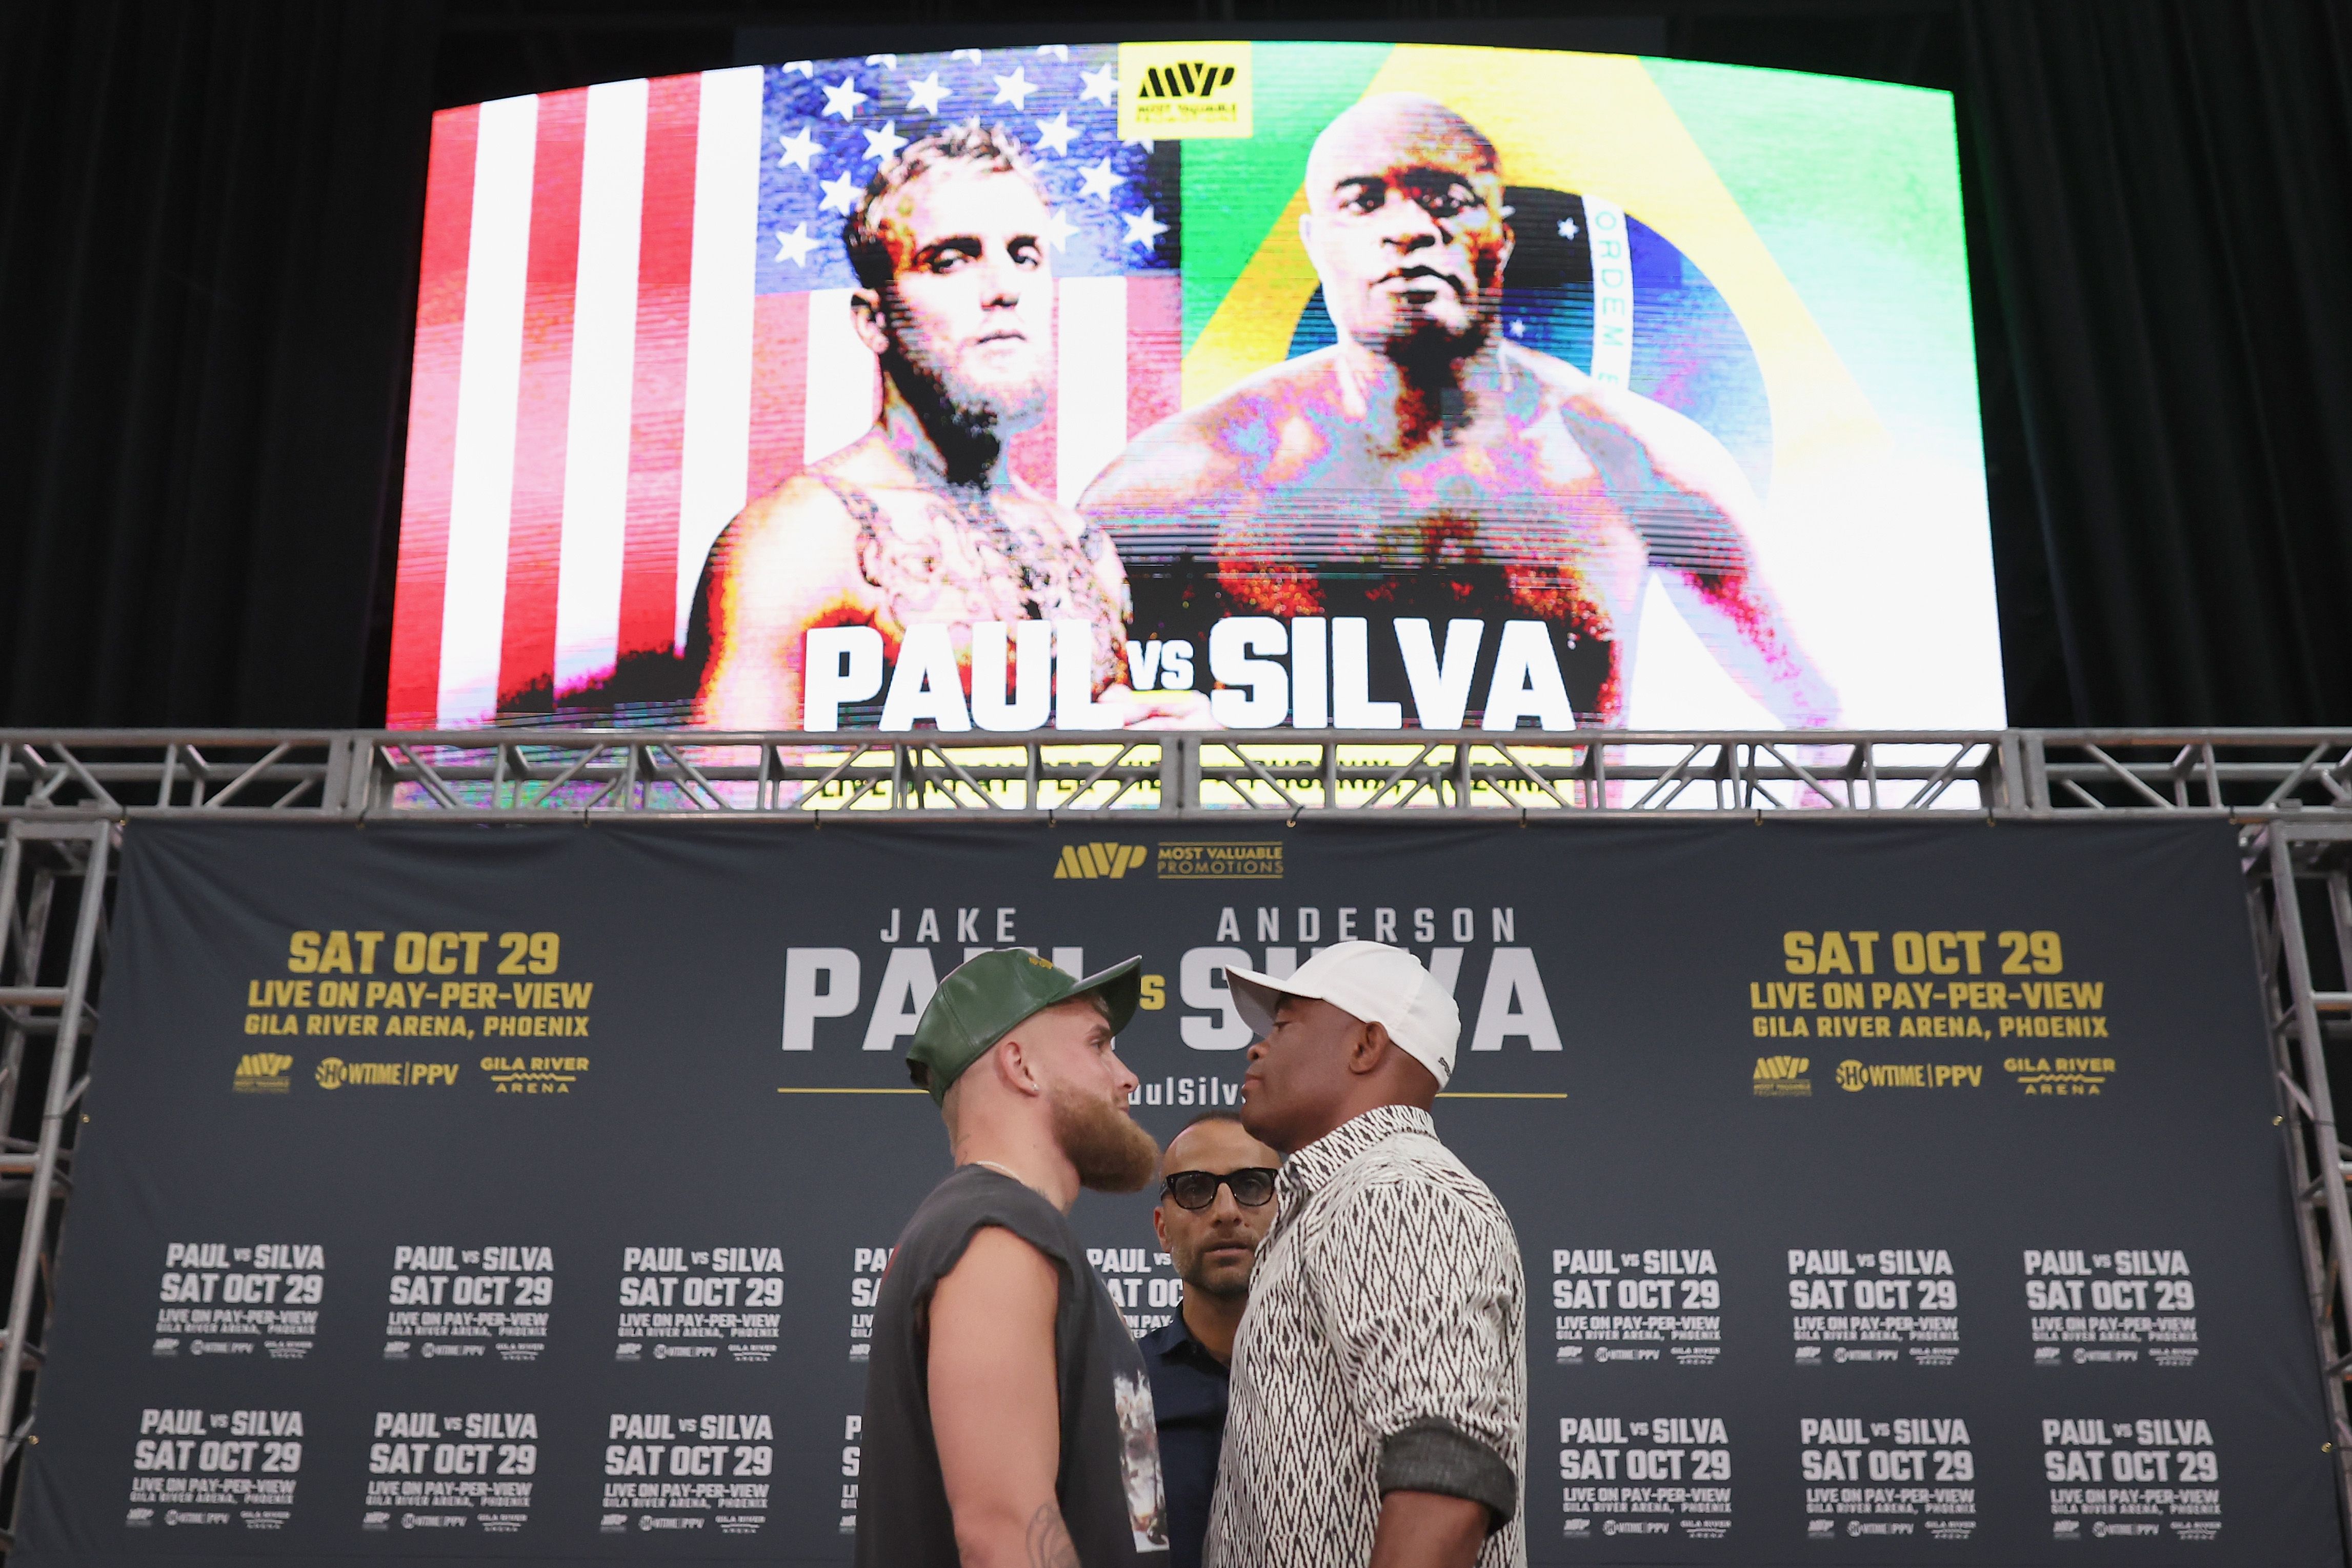 Jake Paul and Anderson Silva ahead of their boxing bout